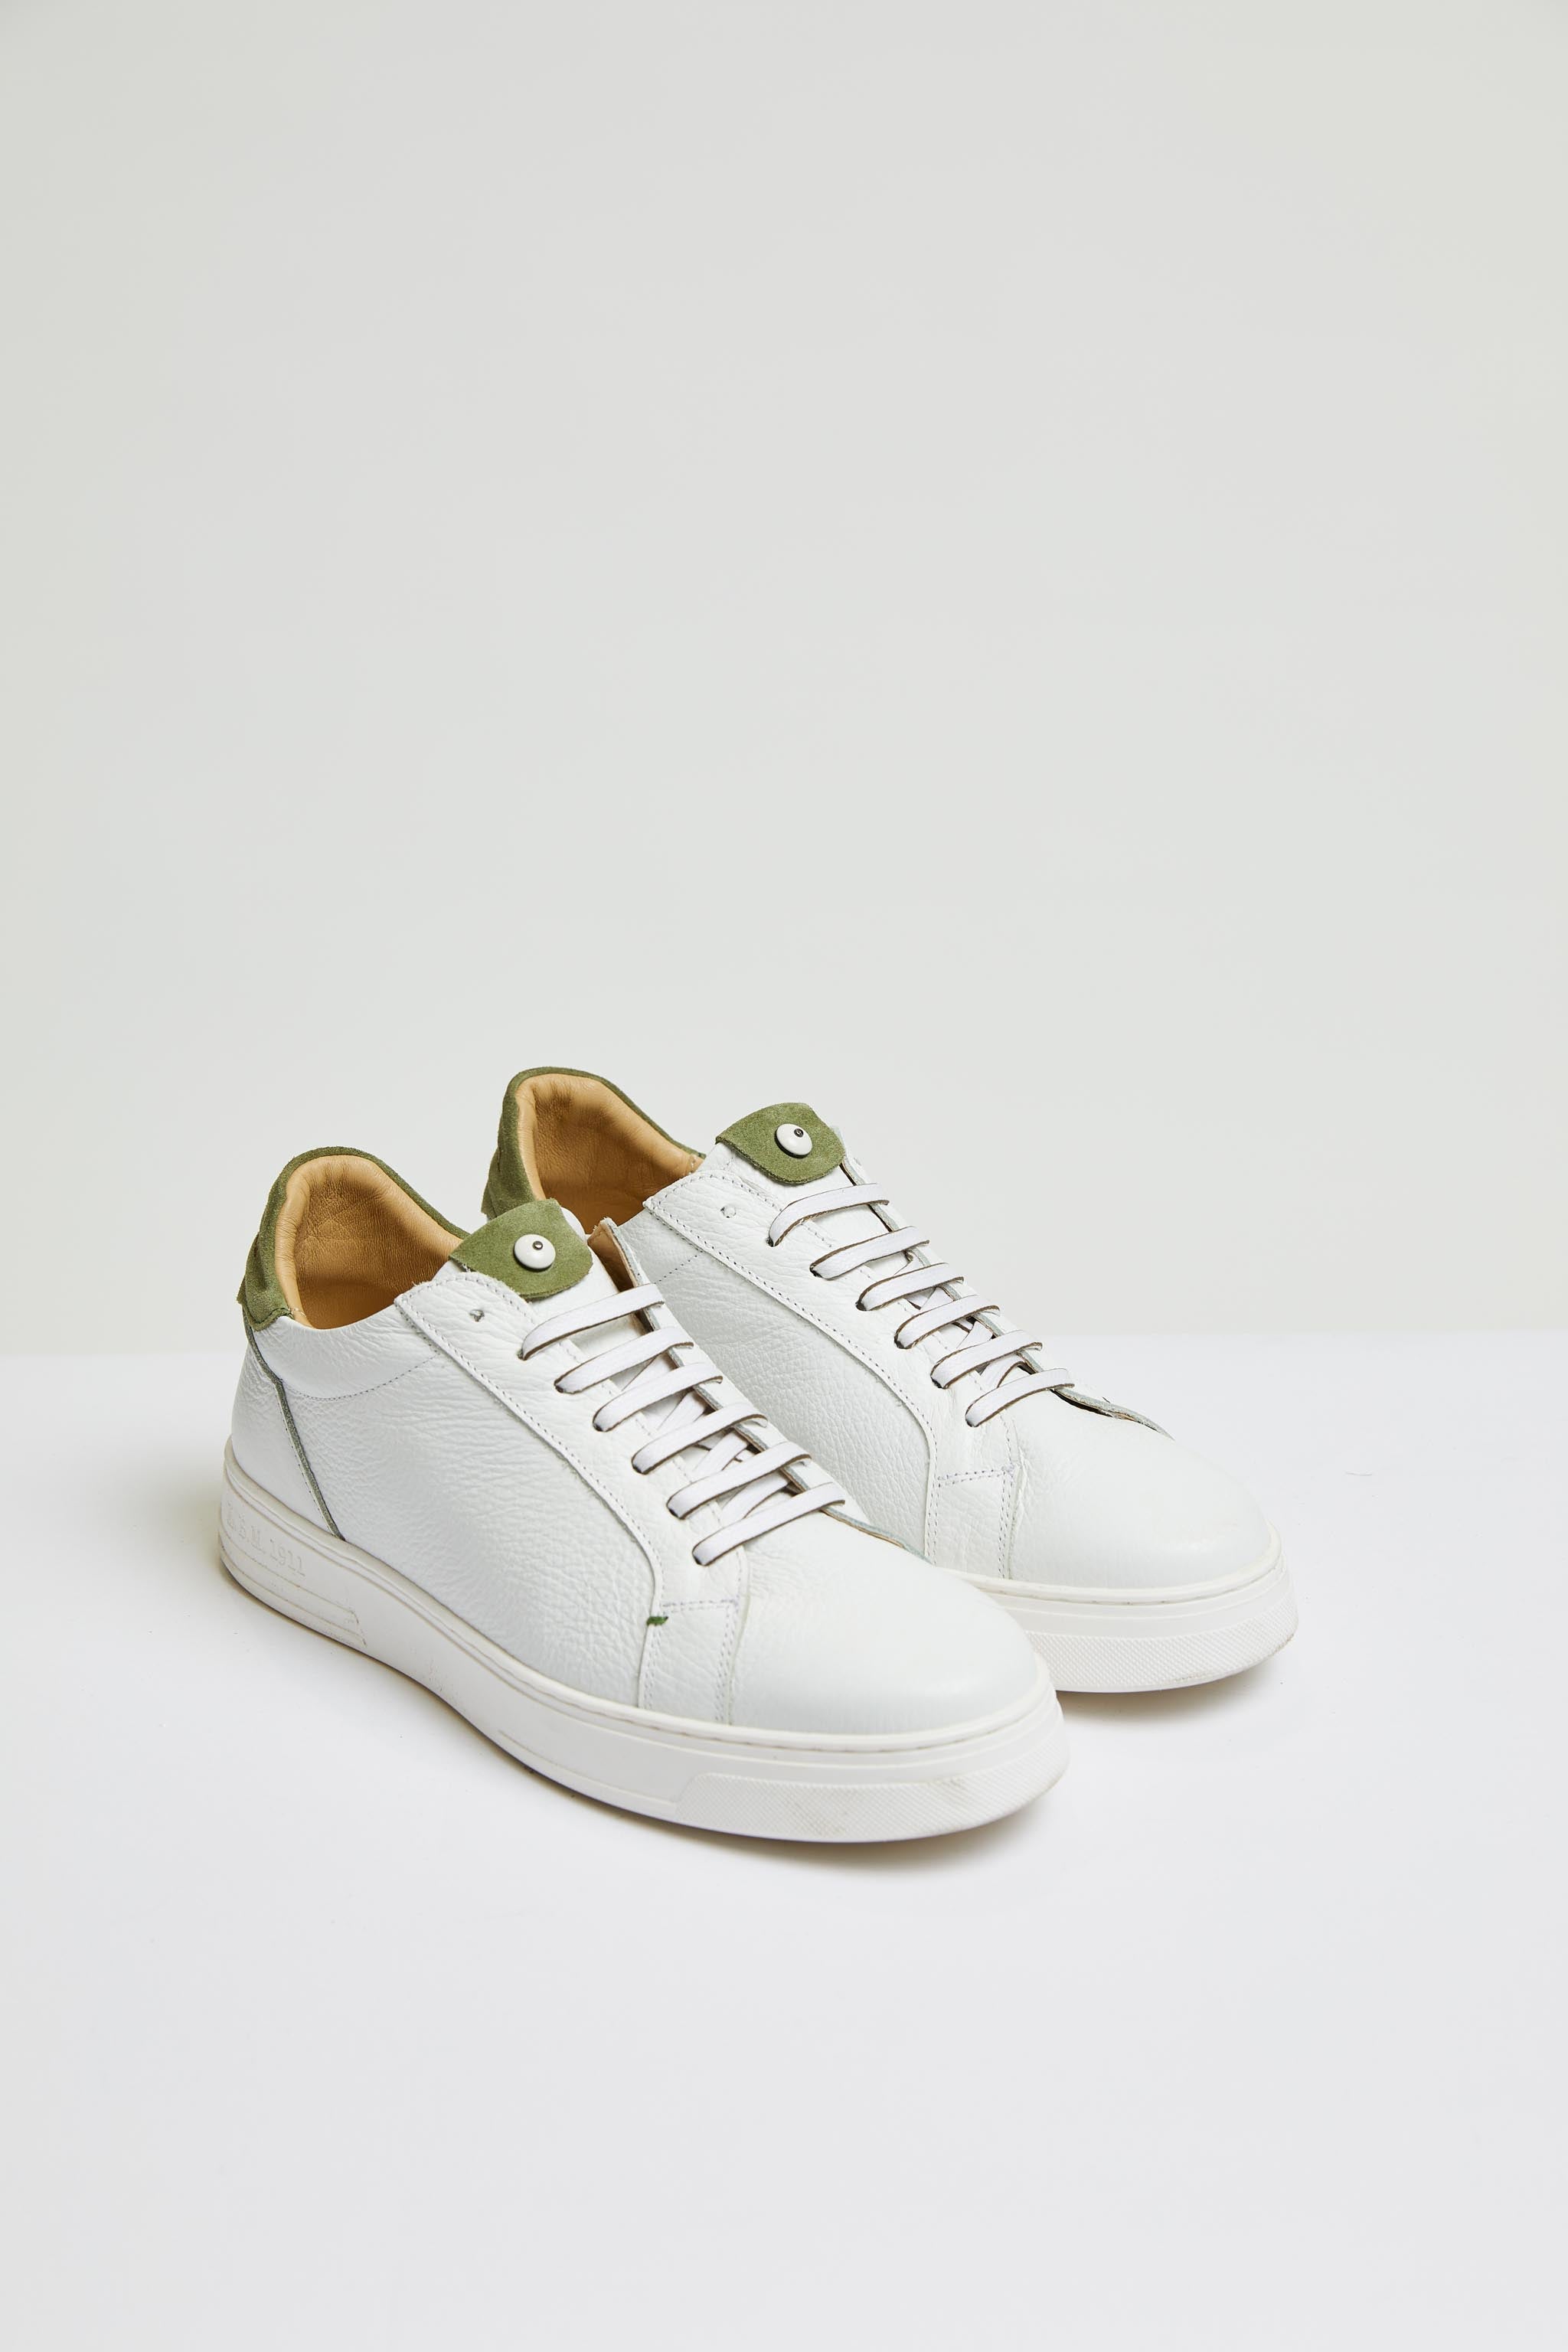 Retro-styled tennis shoe in army green